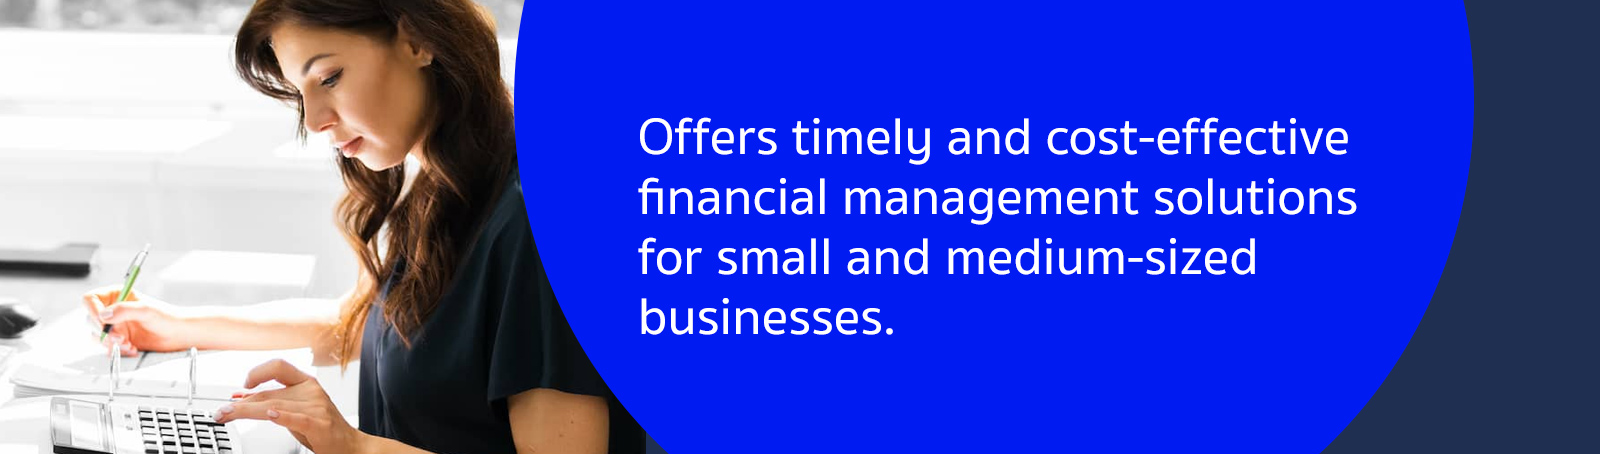 Pimaccounting offers timely and cost-effective financial management solutions for small and medium-sized businesses.